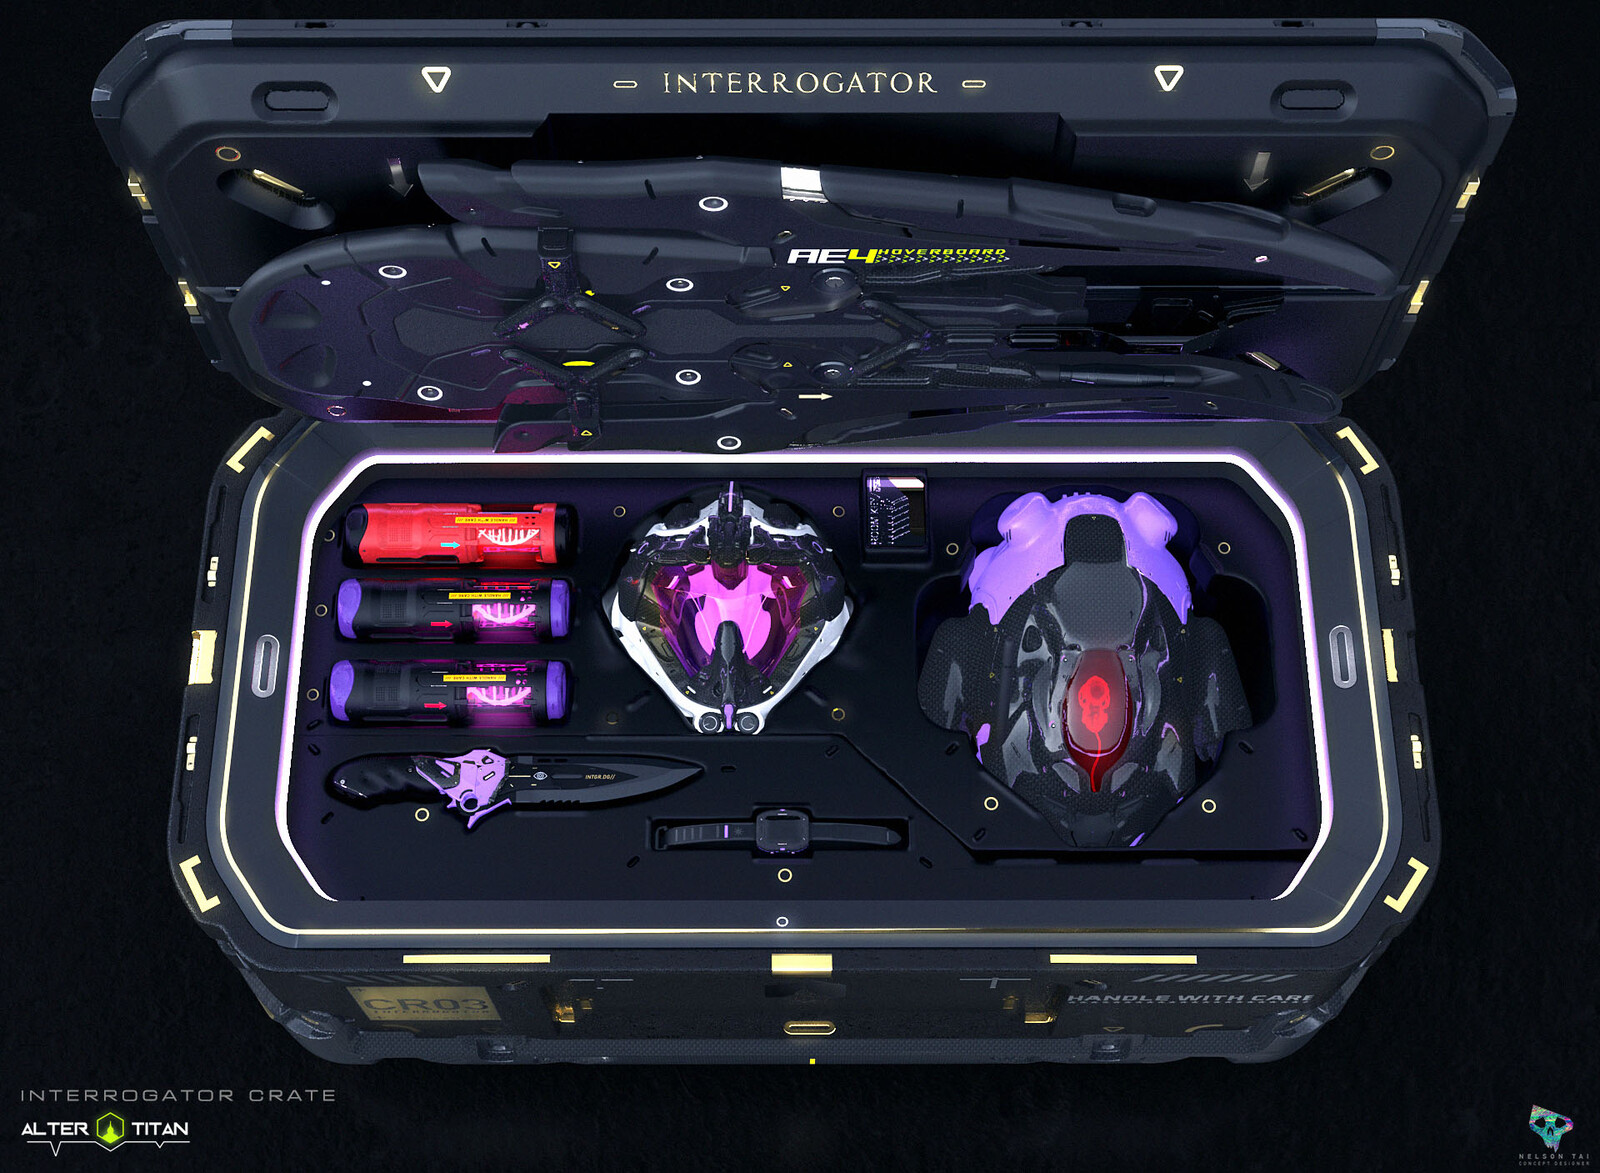 Interrogator's crate: comes with the highest grade for helmet, containers, dagger, link, droid, AND a hoverboard!